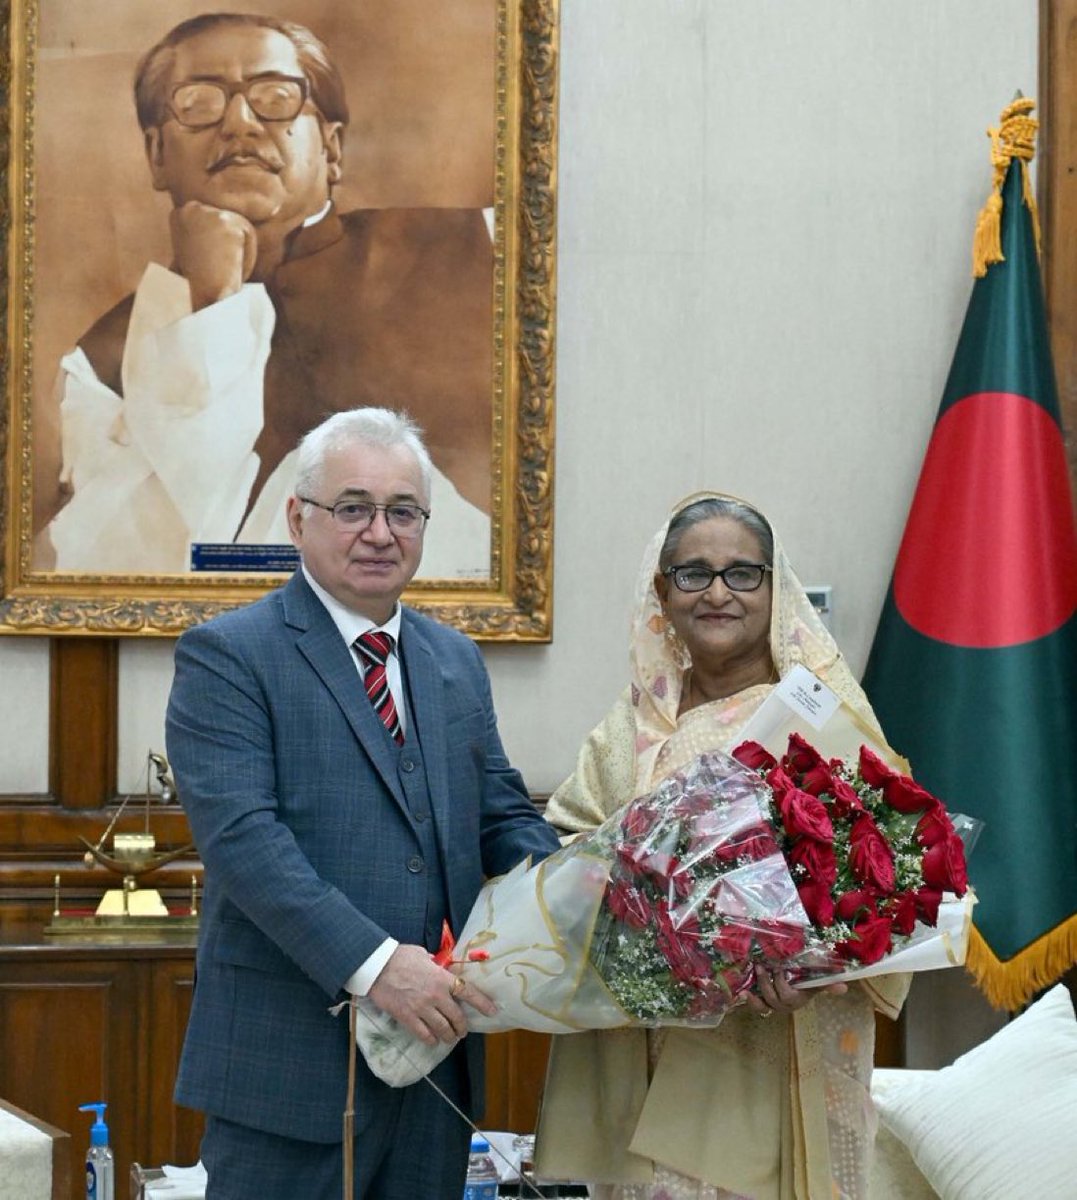 Russian Ambassador #Mantytsky congratulated PM #SheikhHasina for her victory in General Election. Russia is a friend of #Bangladesh since 1971 #LiberationWar & our bonding will be stronger in the near future.

Long live Bangladesh-Russia friendship.
🇧🇩🤝🇷🇺
#Democracy #Elections